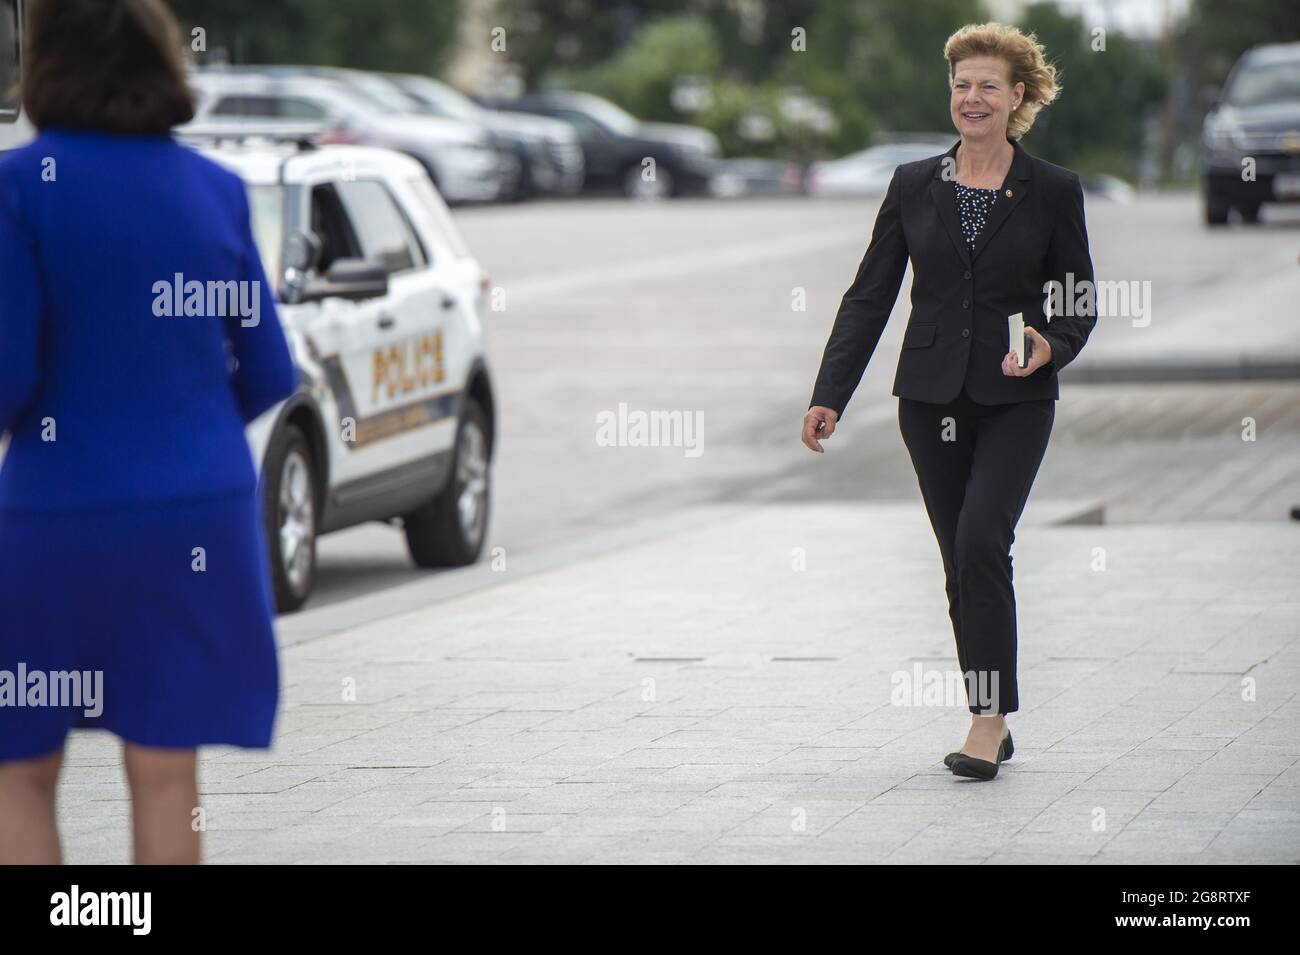 Washington, United States. 22nd July, 2021. Sen. Tammy Baldwin, D-Wis., joins other senators on US Capitol Police buses to go to the White House, where President Joe Biden and Vice President Kamala Harris will sign the VOCA Fix to Sustain the Crime Victims Fund Act of 2021 into law on Thursday, July 22, 2021. Photo by Bonnie Cash/UPI Credit: UPI/Alamy Live News Stock Photo